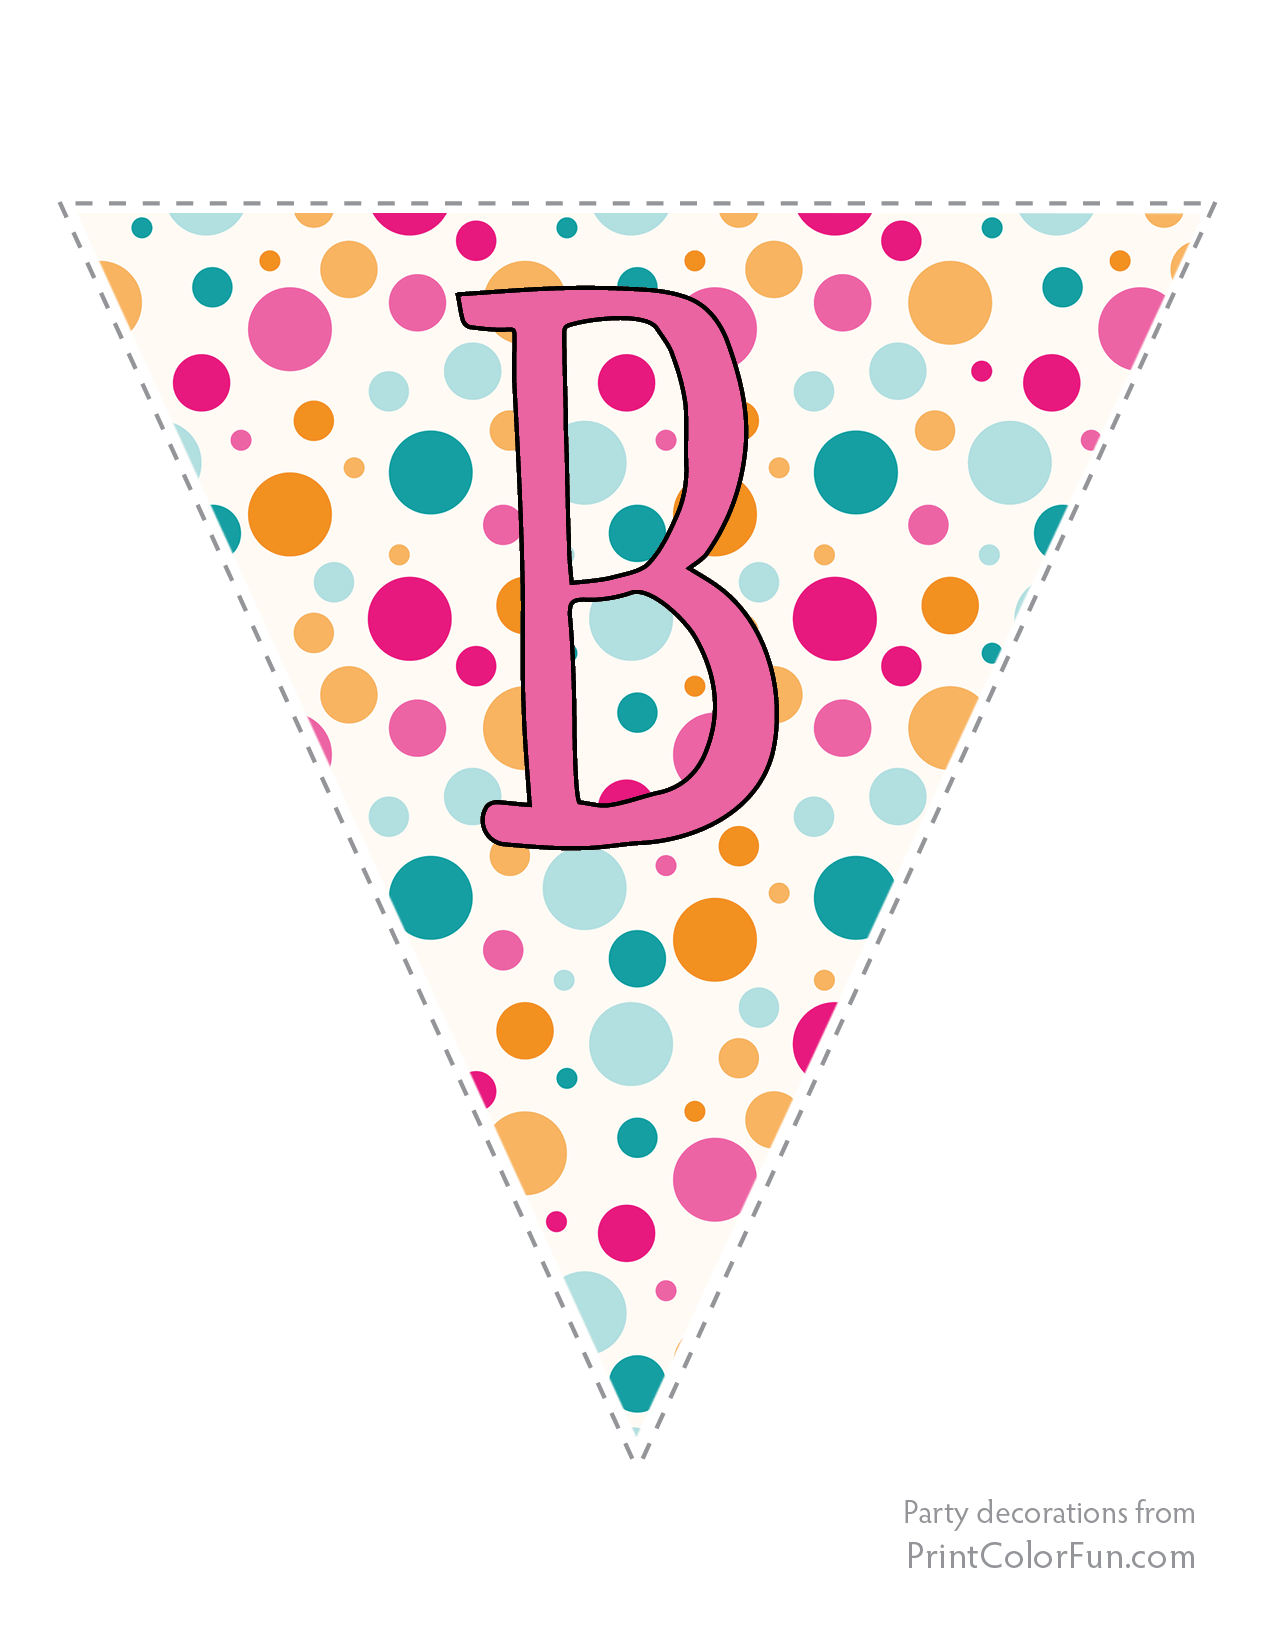 Bright polka dot flags with pink lettering - Print Color Fun!